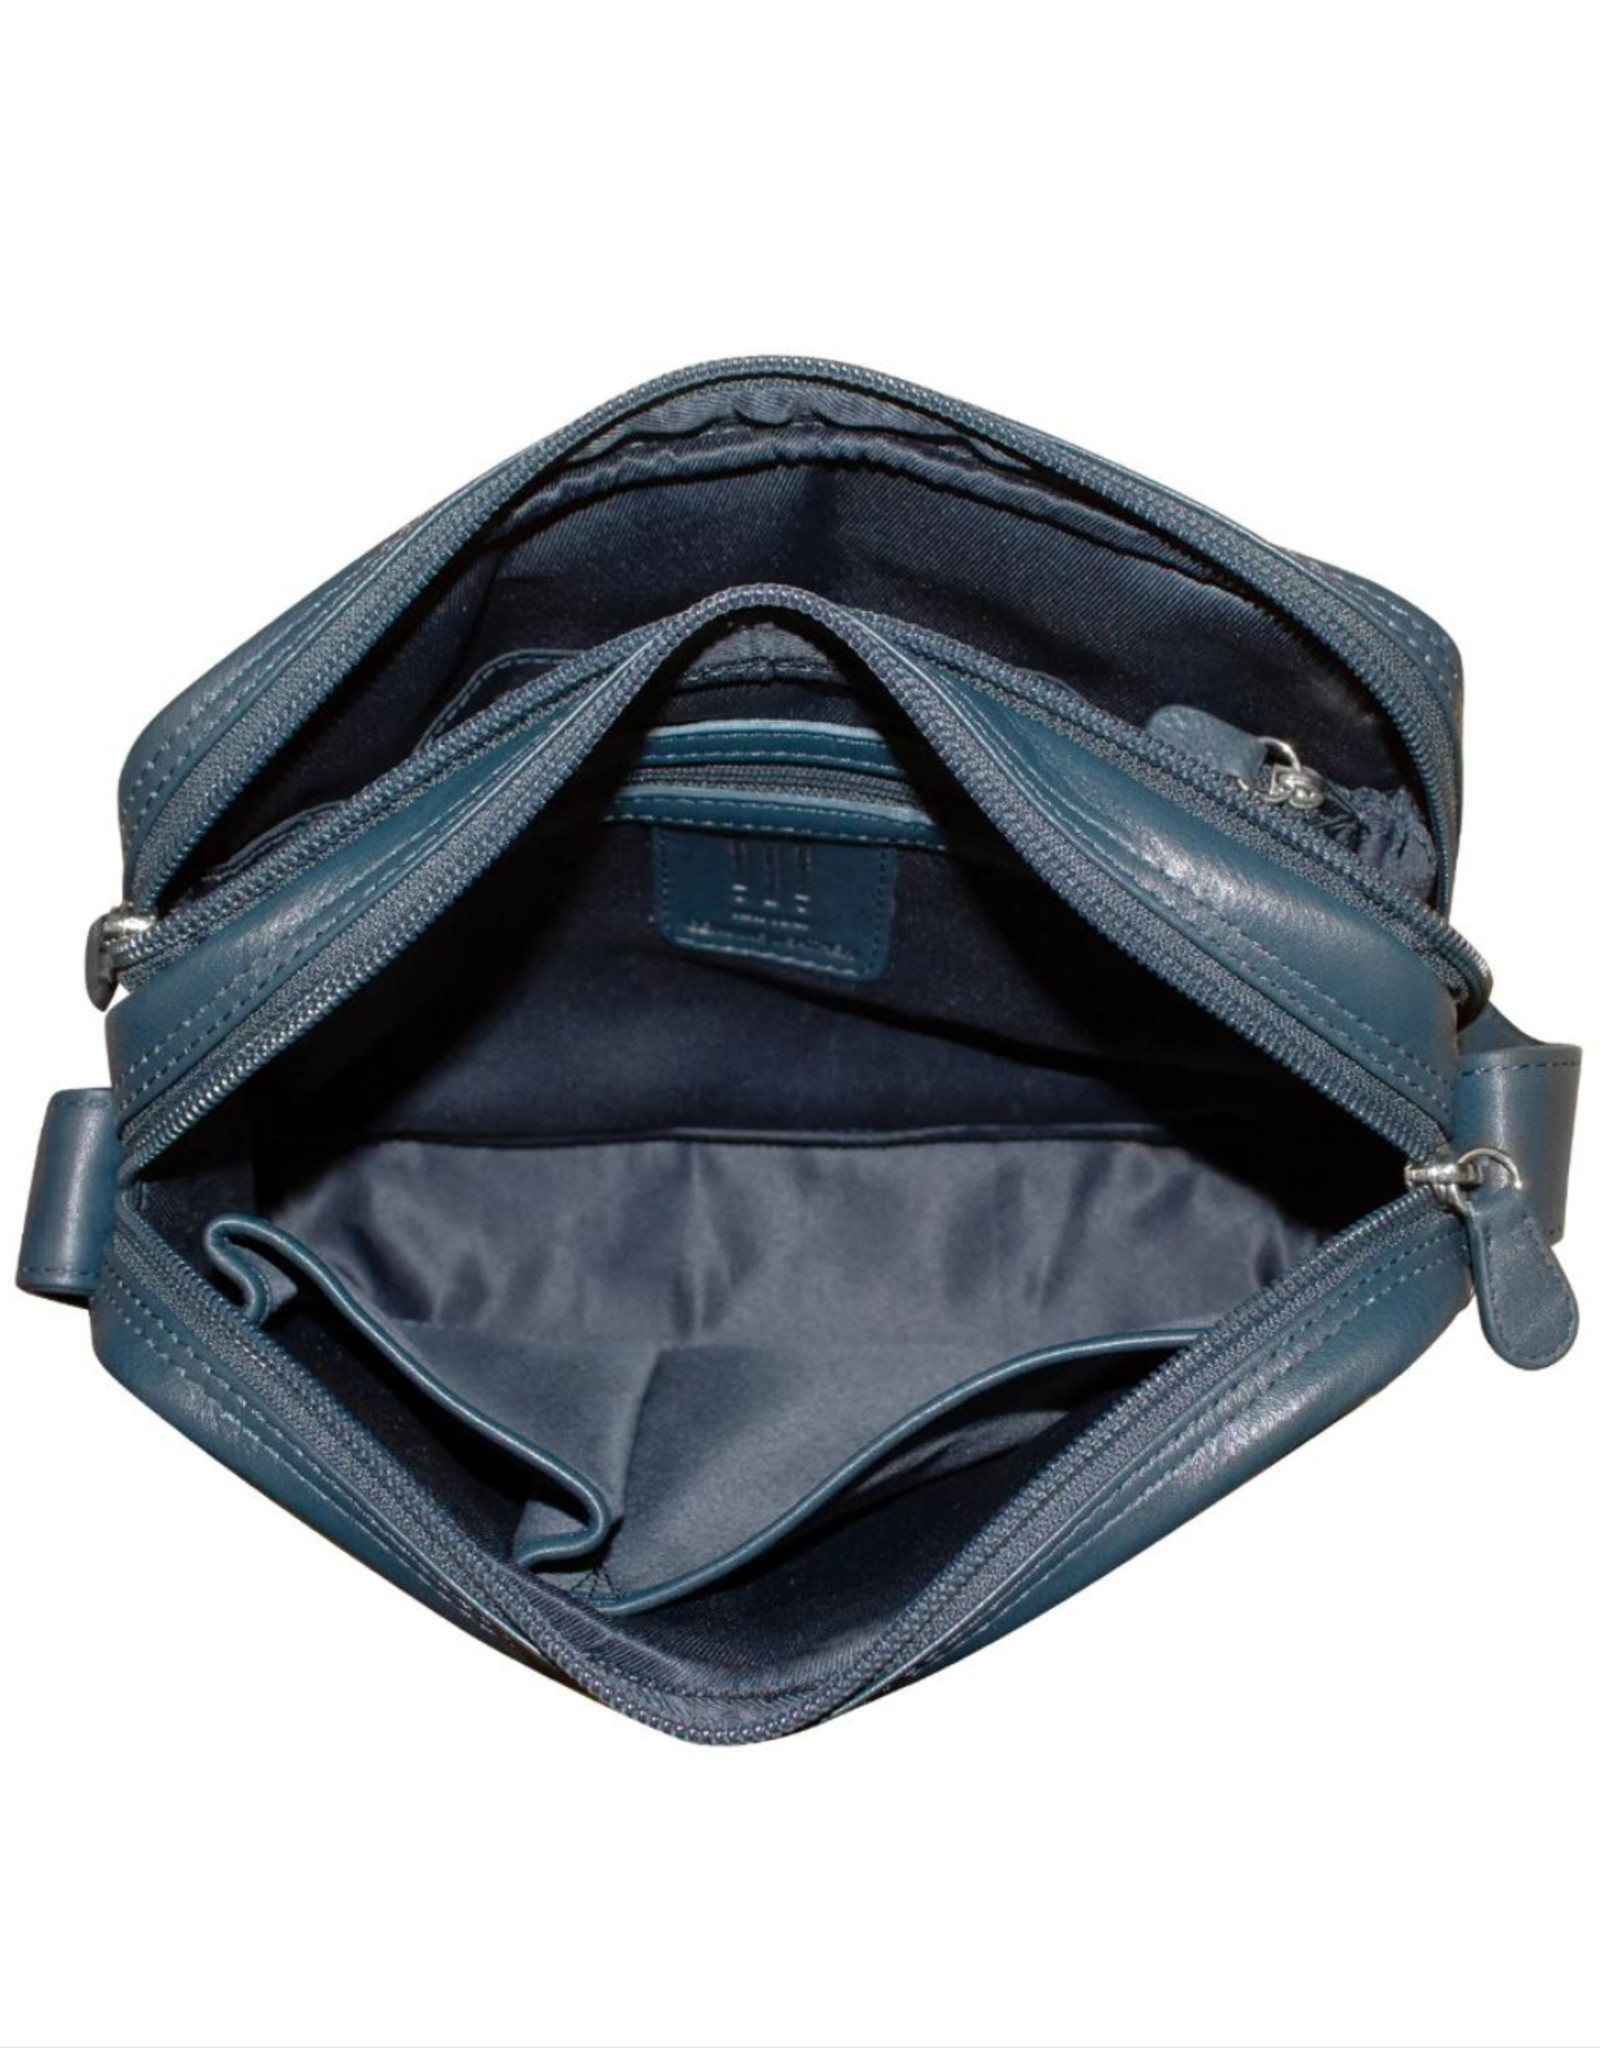 Two Compartment Organizer Bag